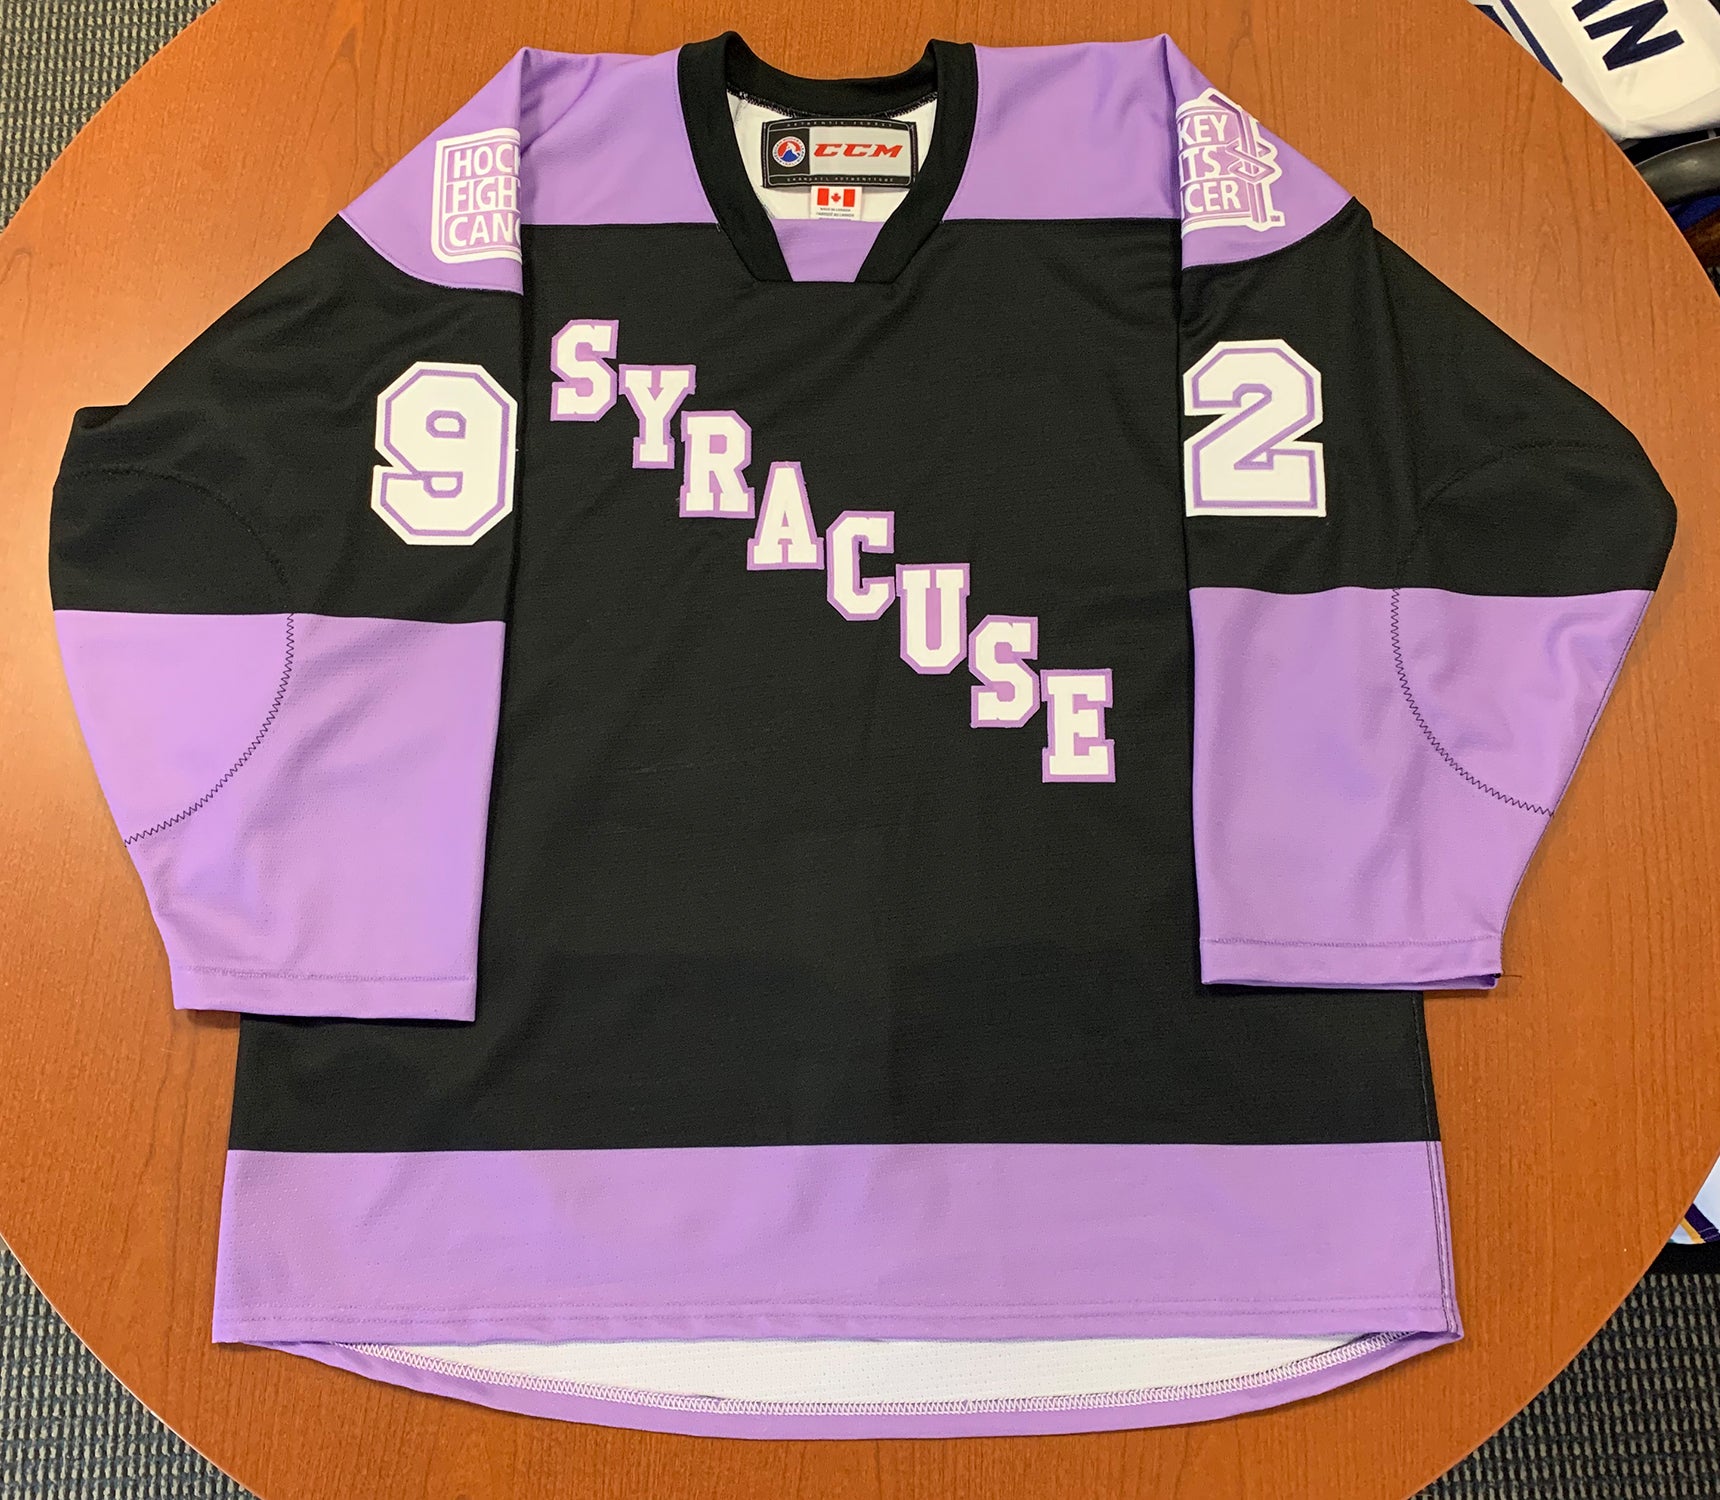 Hockey Fights Cancer for sale